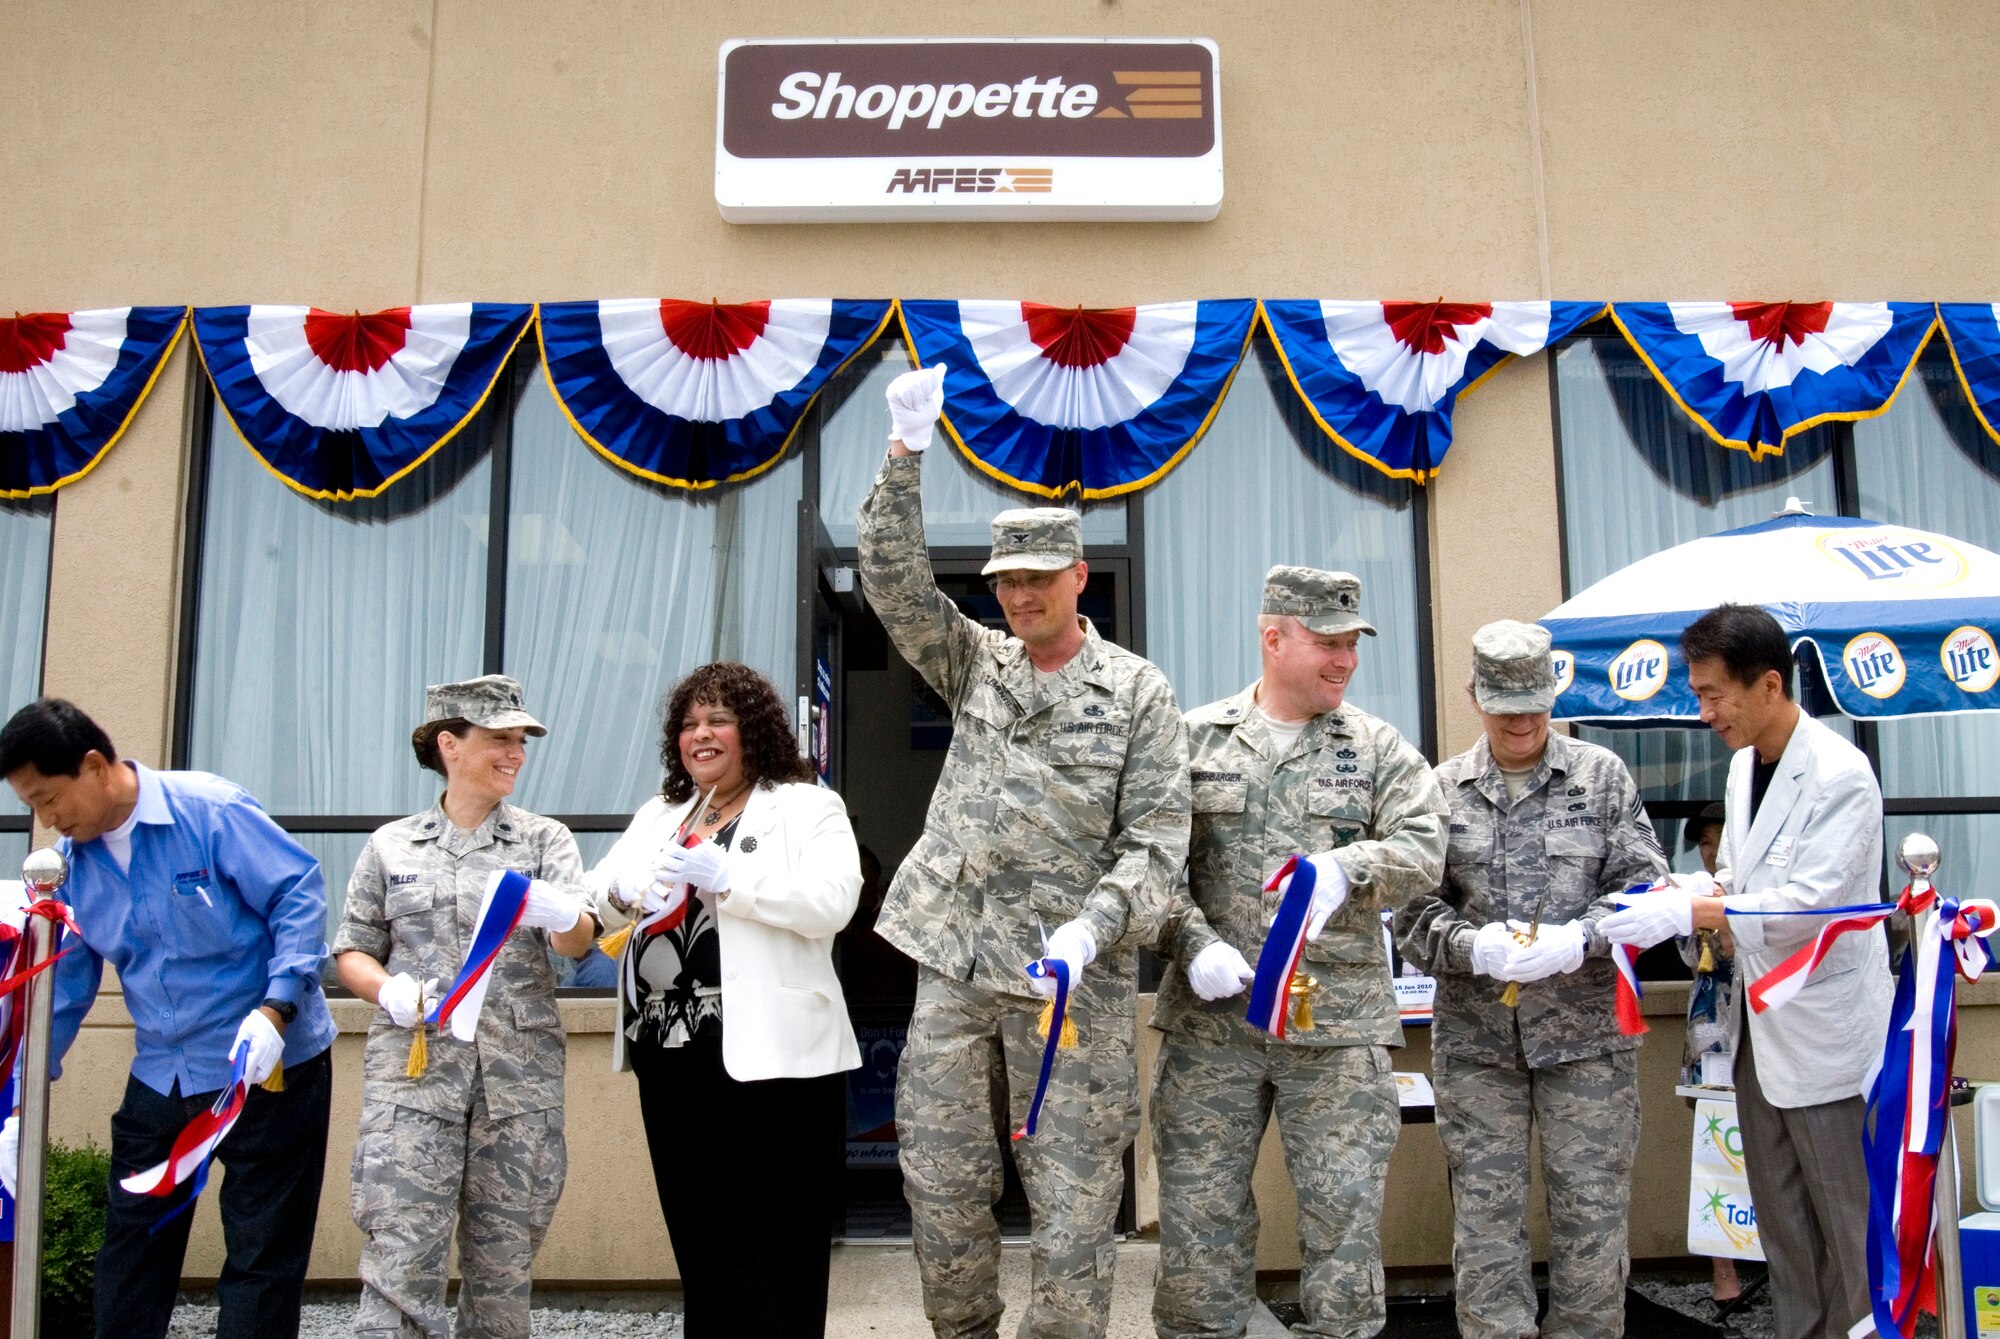 KUNSAN AIR BASE, Republic of Korea -- Col. Patrick Clements, 8th Mission Support Group Commander, leads other distinguished guests in a ribbon cutting during the grand opening of the new base shoppette. The shoppette construction began April 26 and was complete on May 26, costing approximately $41,000 to build. The hours of operation are 7:30 a.m. to 10 p.m. Monday through Thursday, 7:30 a.m. to 11 p.m. Friday and Saturday, and 10 a.m. to 10 p.m. Sunday. (U.S. Air Force photo/Staff Sgt. Jonathan Pomeroy)